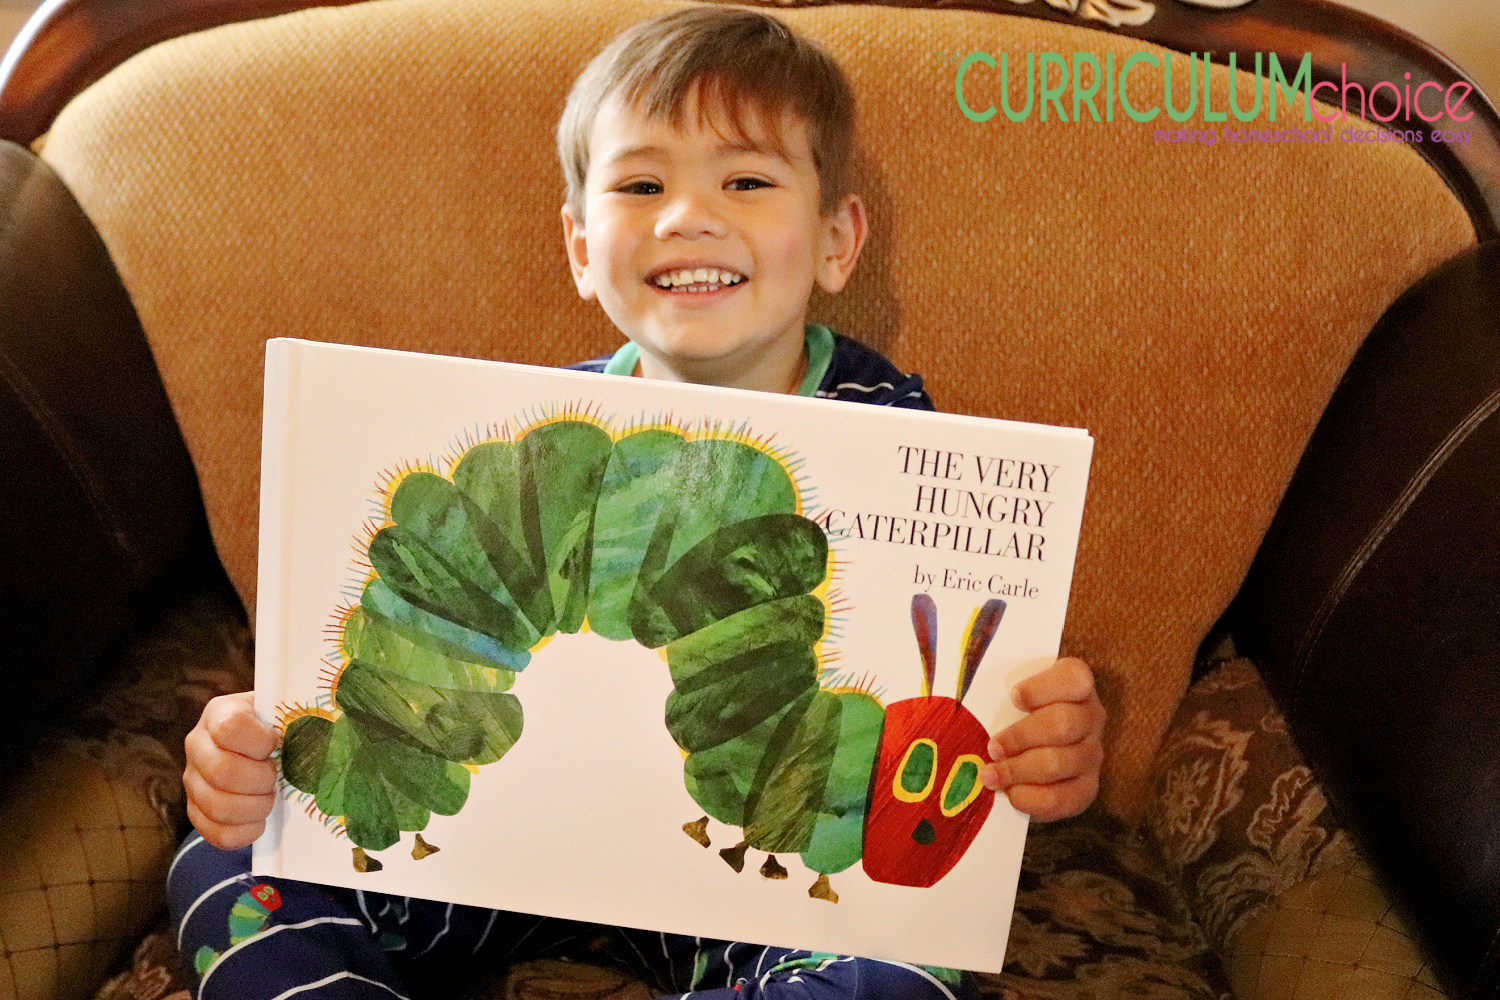 Preschoolers Storytime with Hungry Little Caterpillar